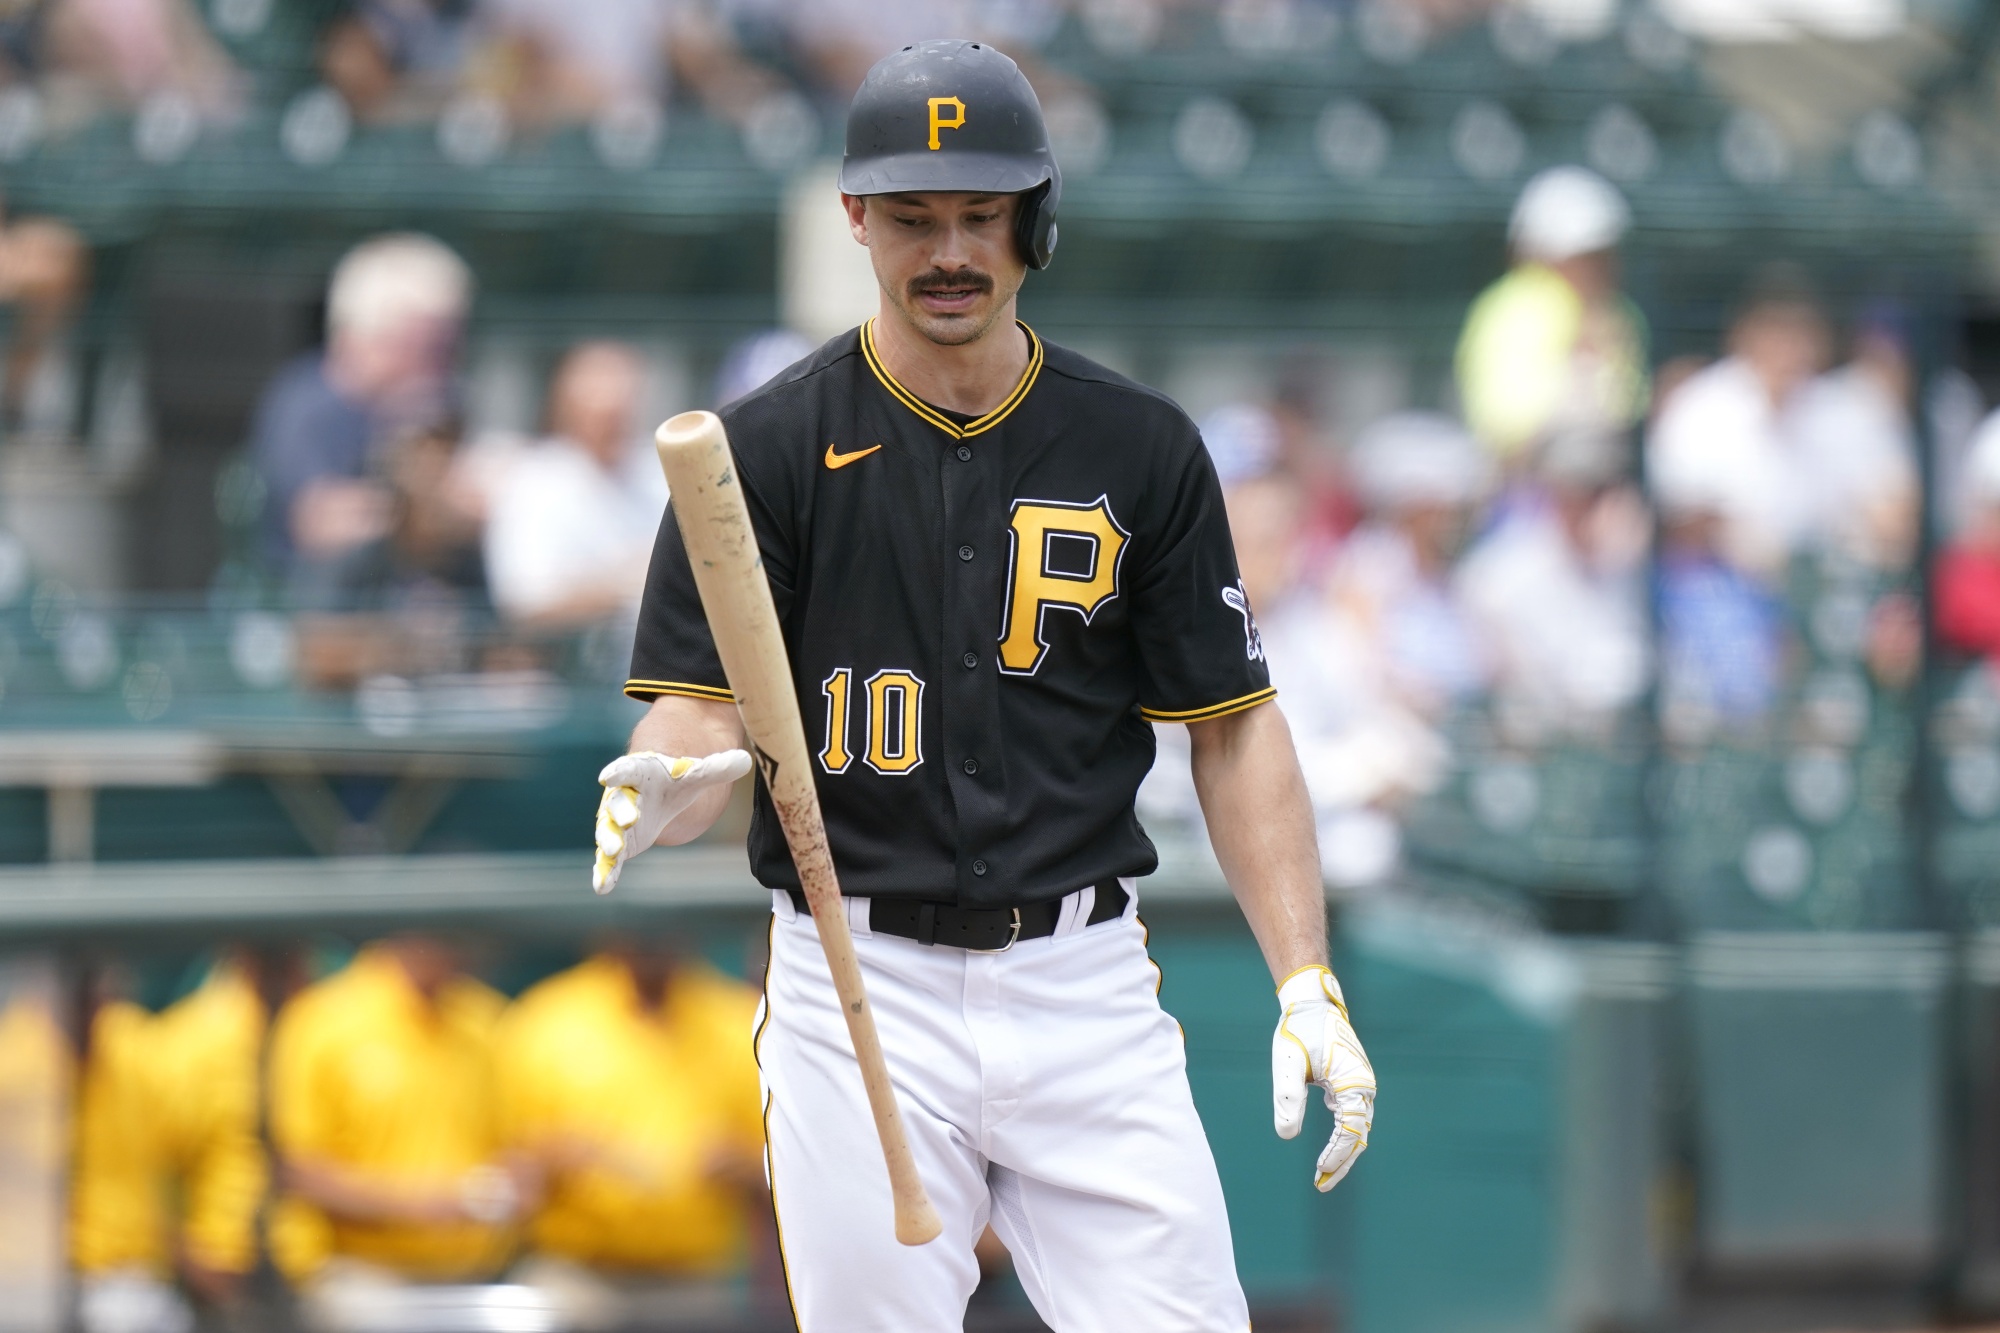 Ranking All the Pittsburgh Pirates Uniforms From Worst To Best